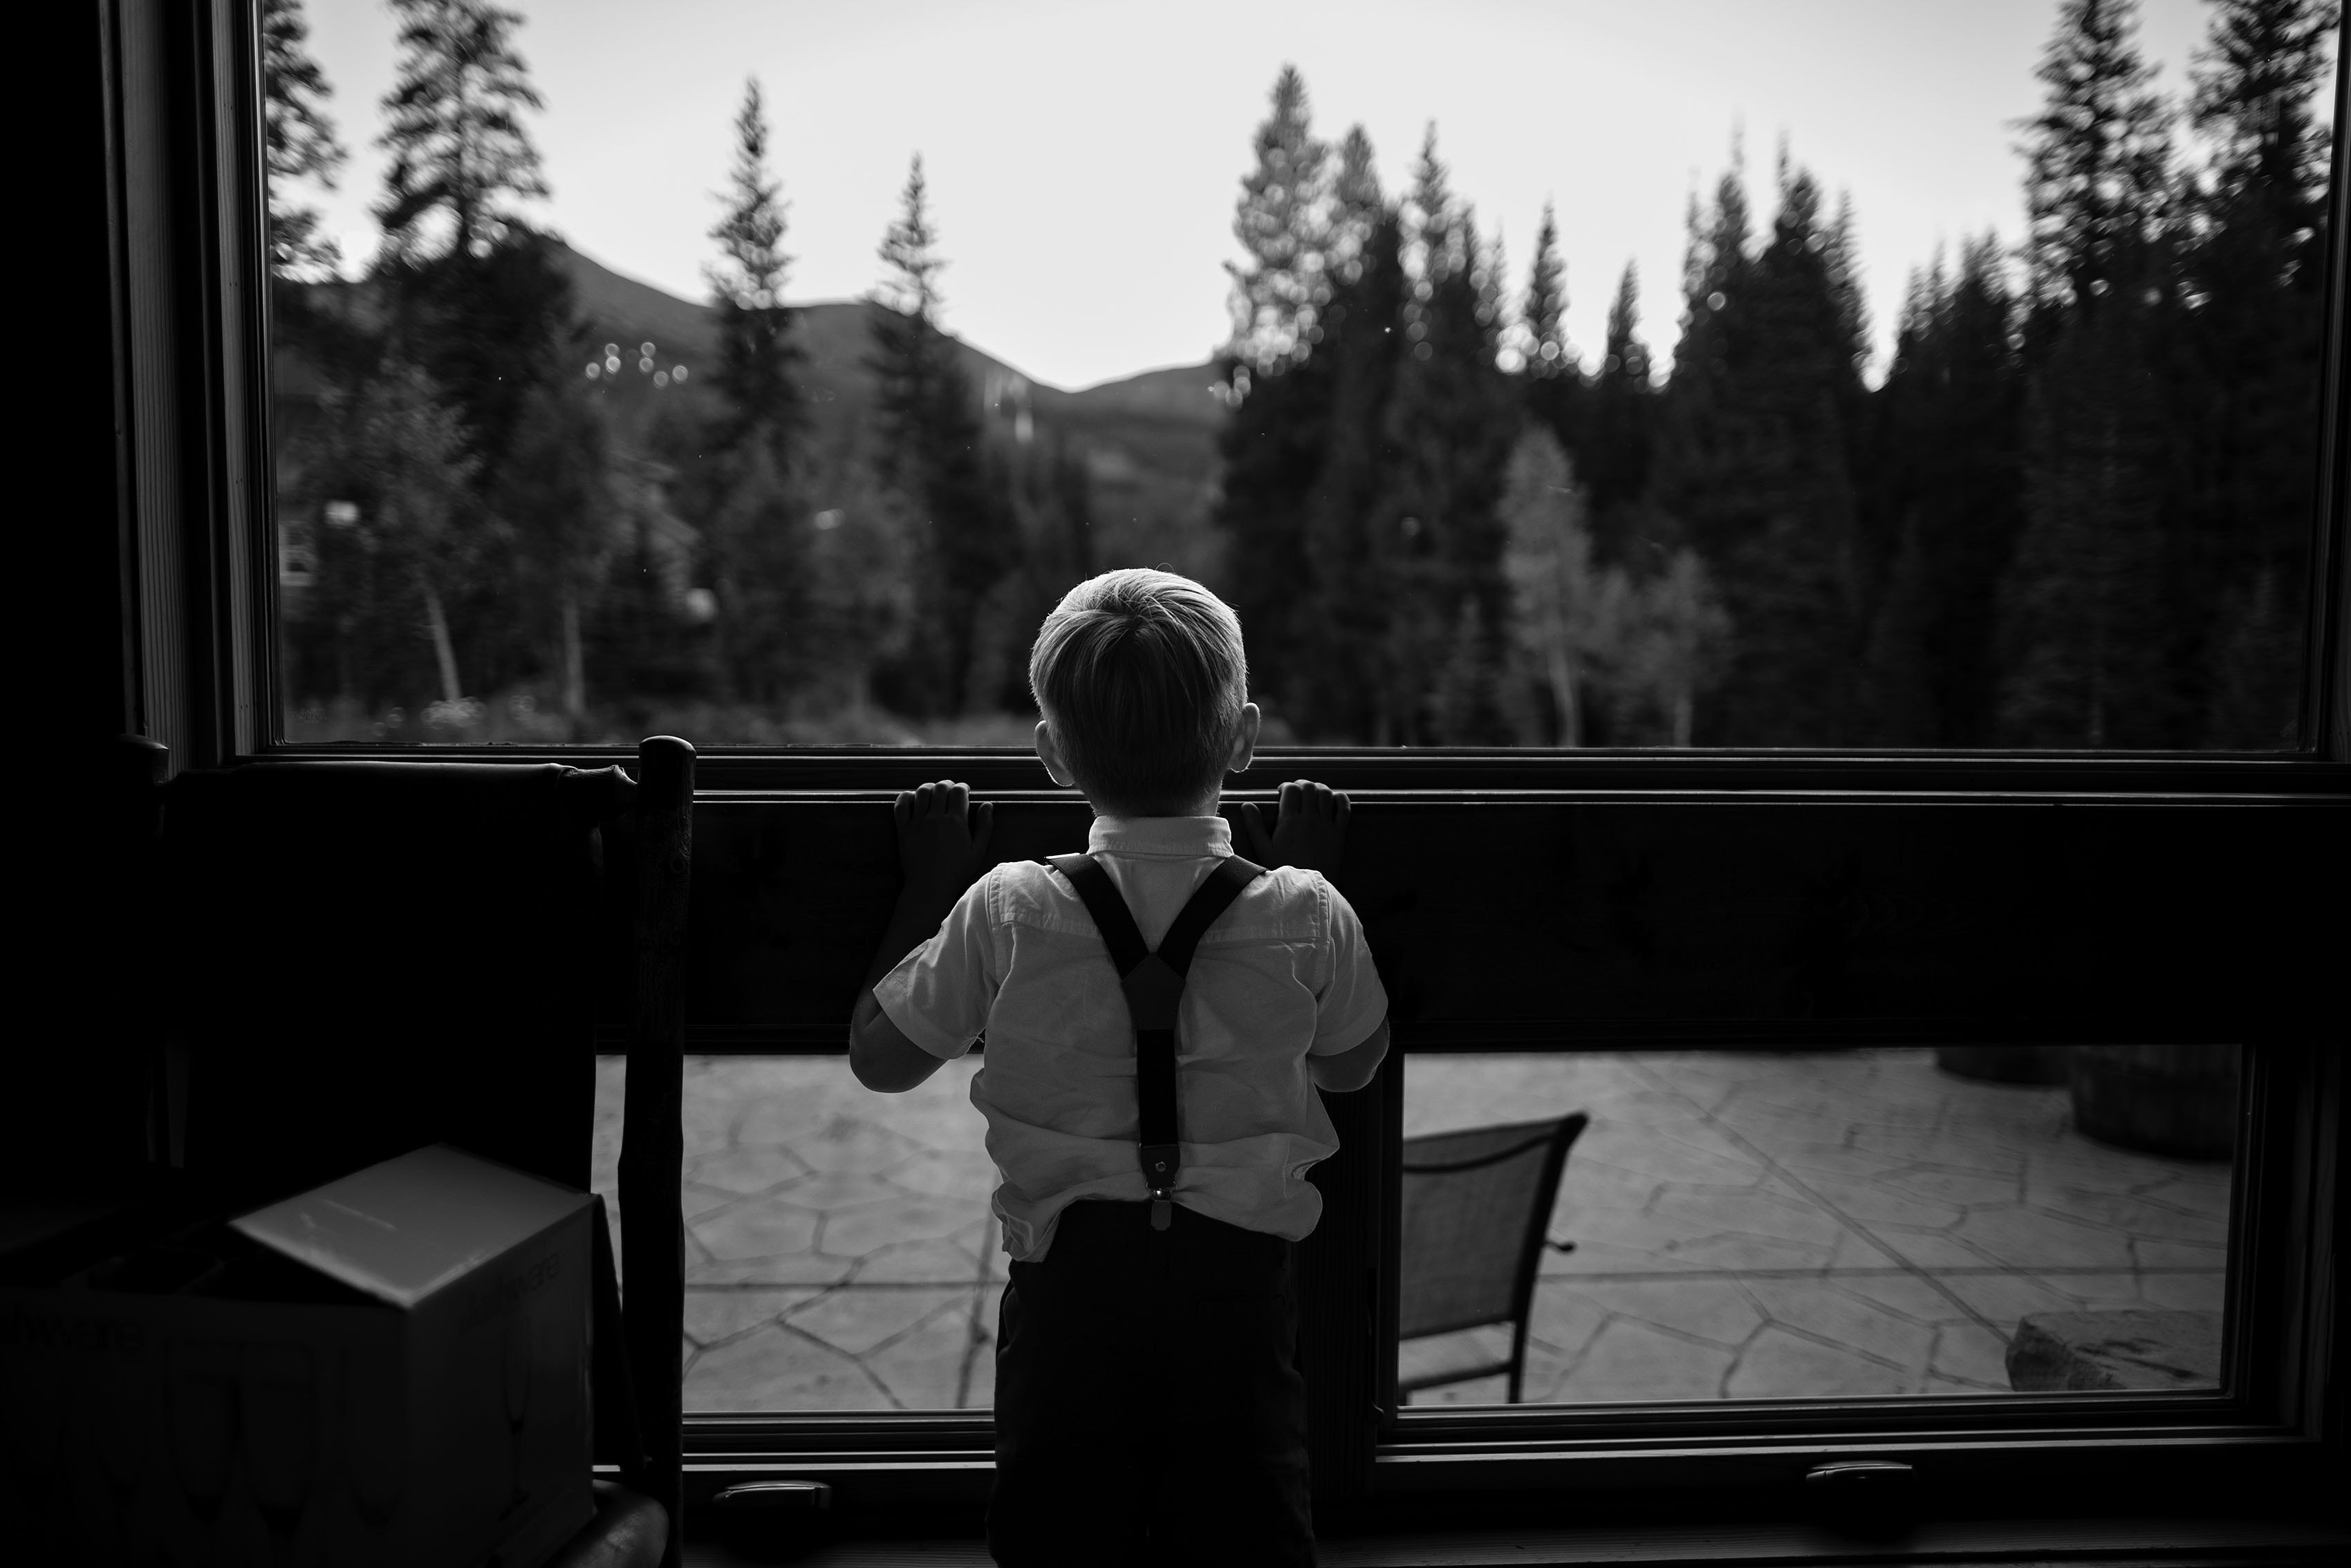 A young boy looks out the window